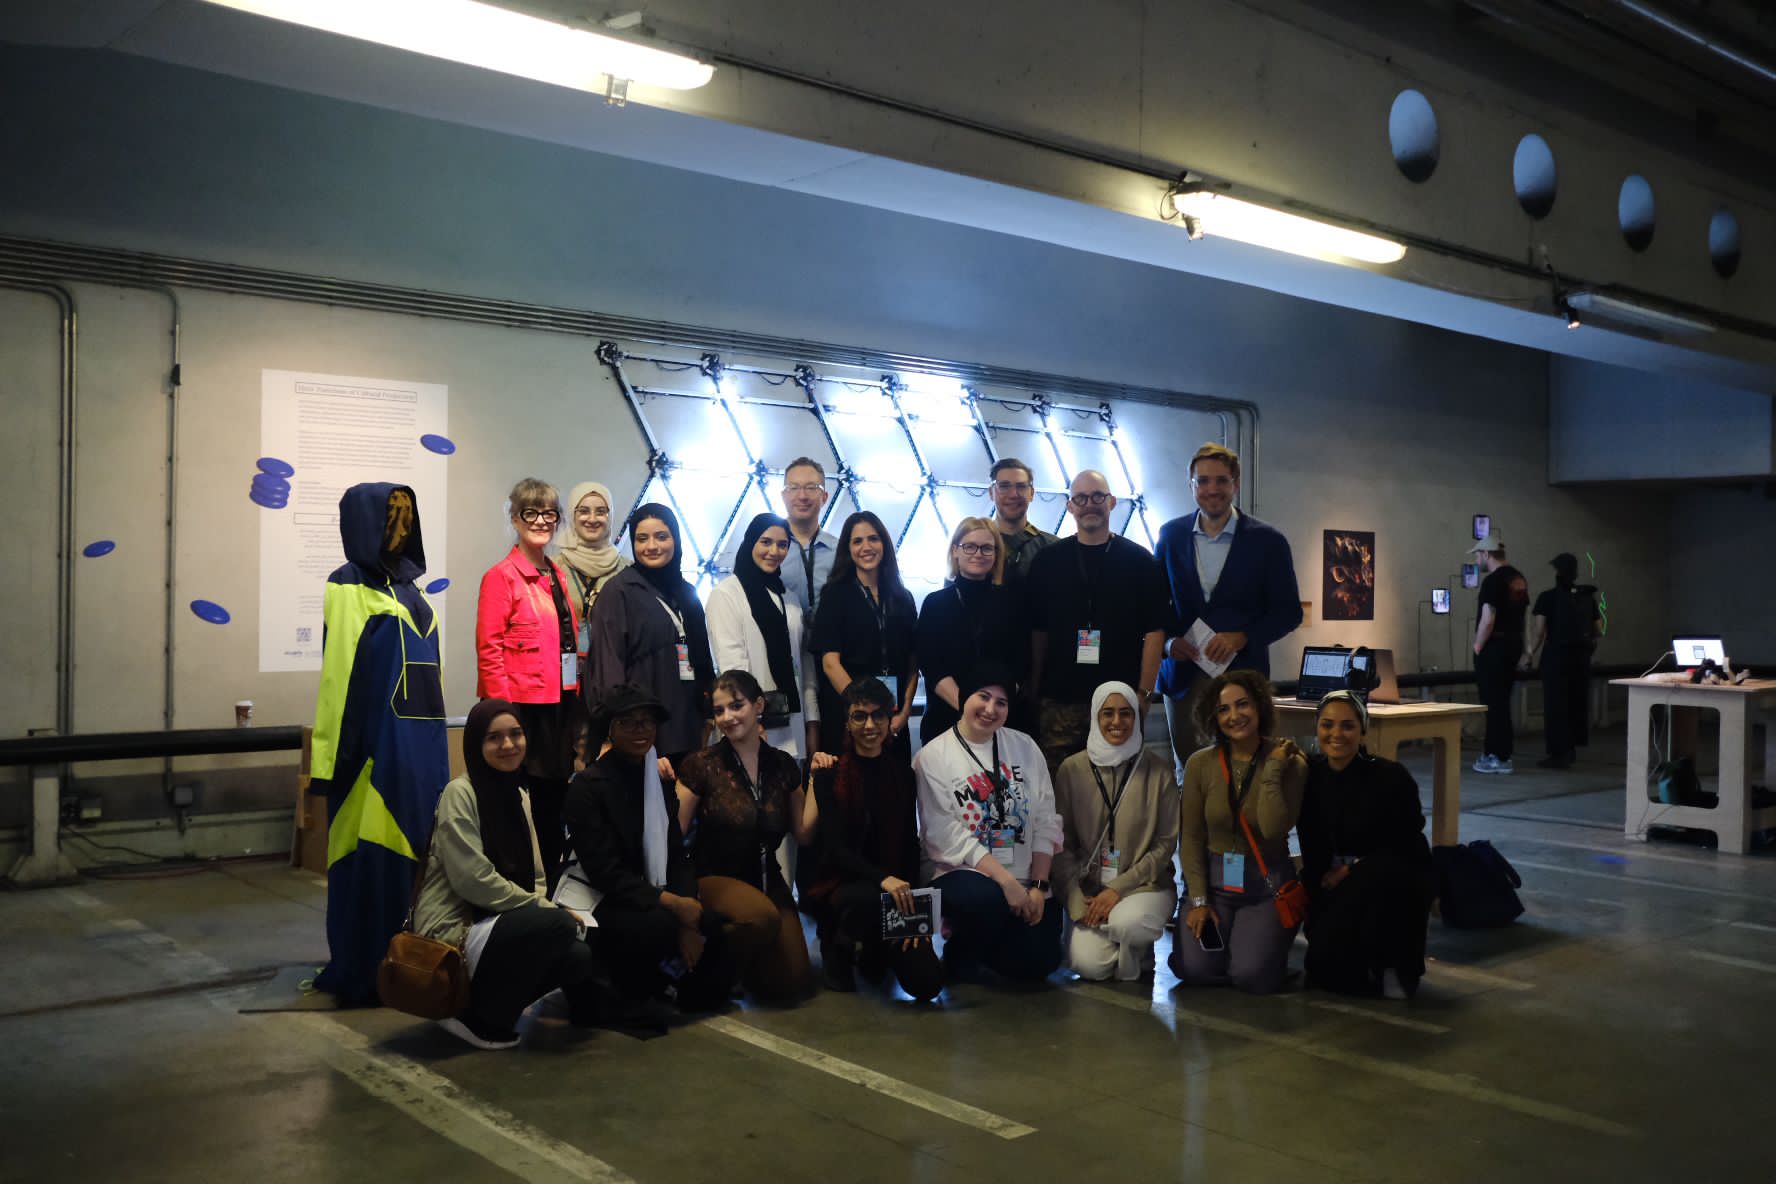 a Group Photo of the vcu arts qatar team at Ars Electronica 